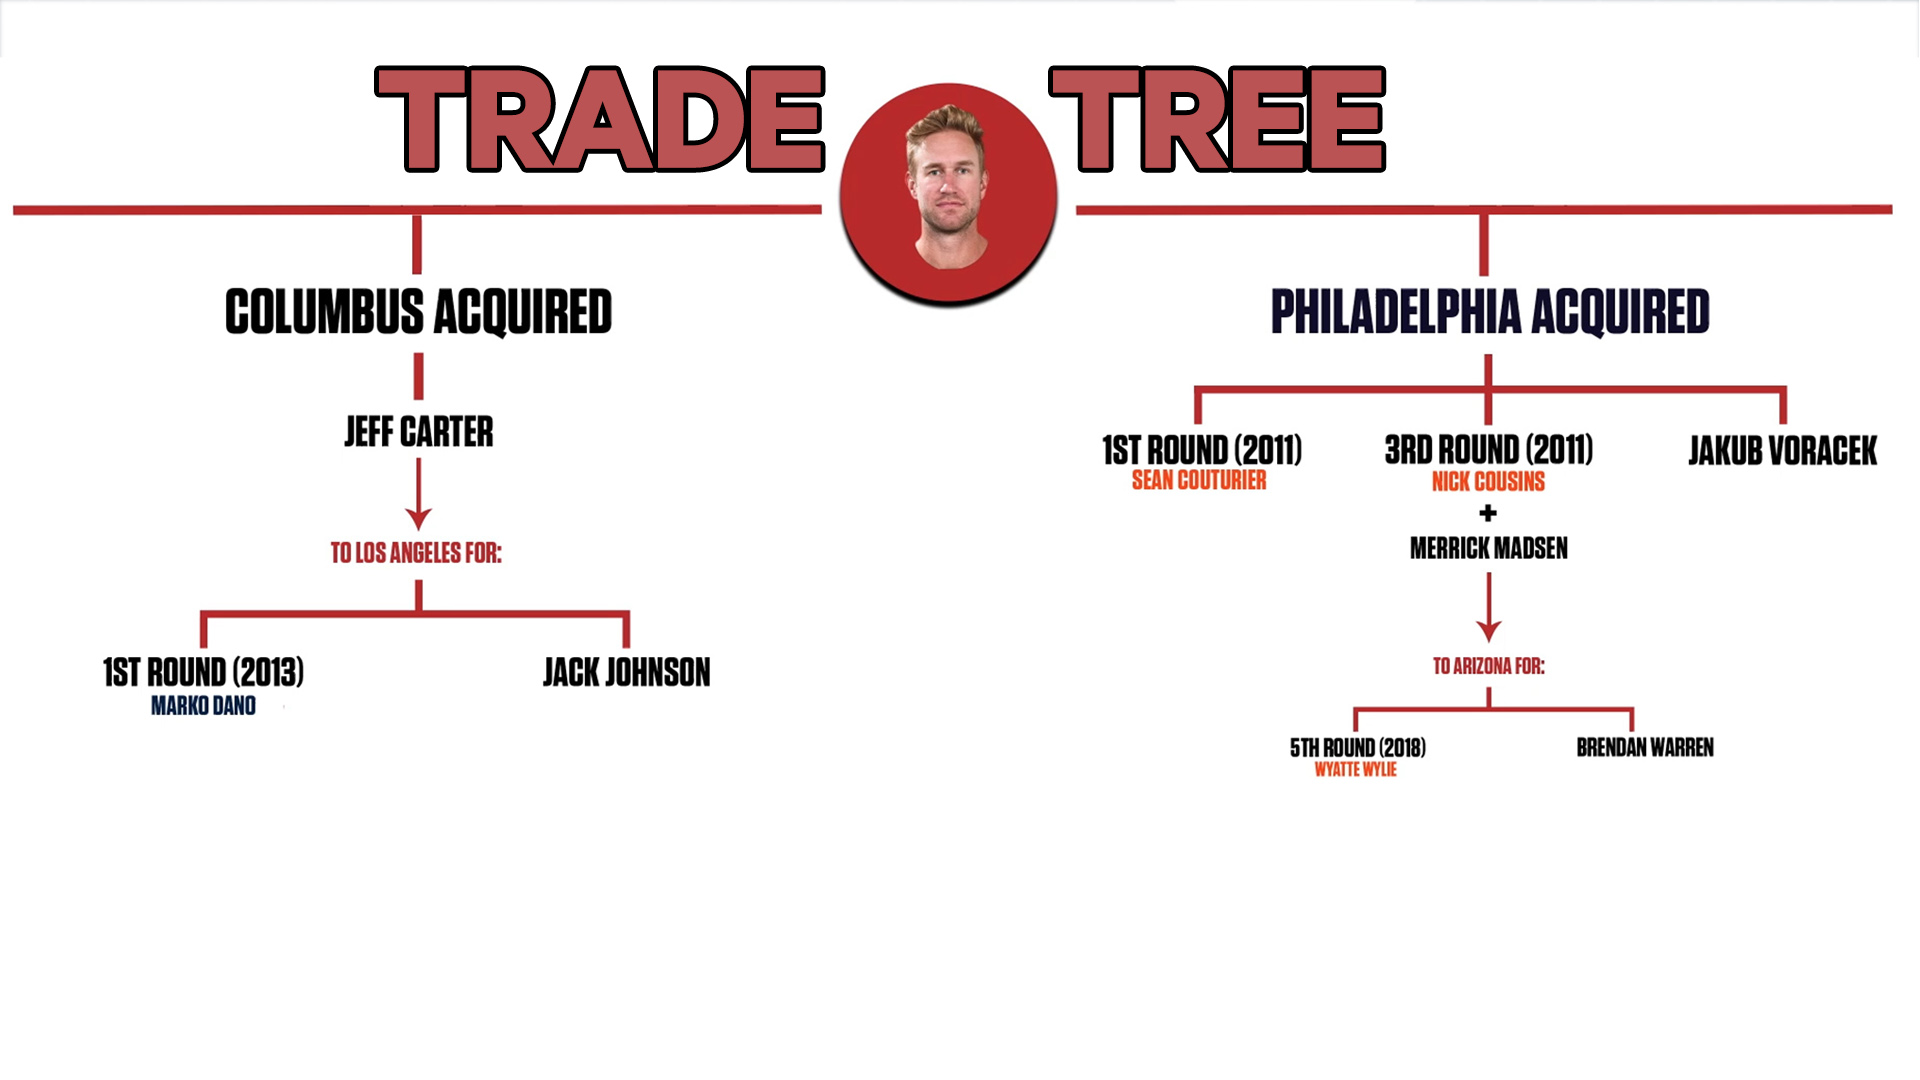 Jeff Carter's Indirect No-Trade Clause